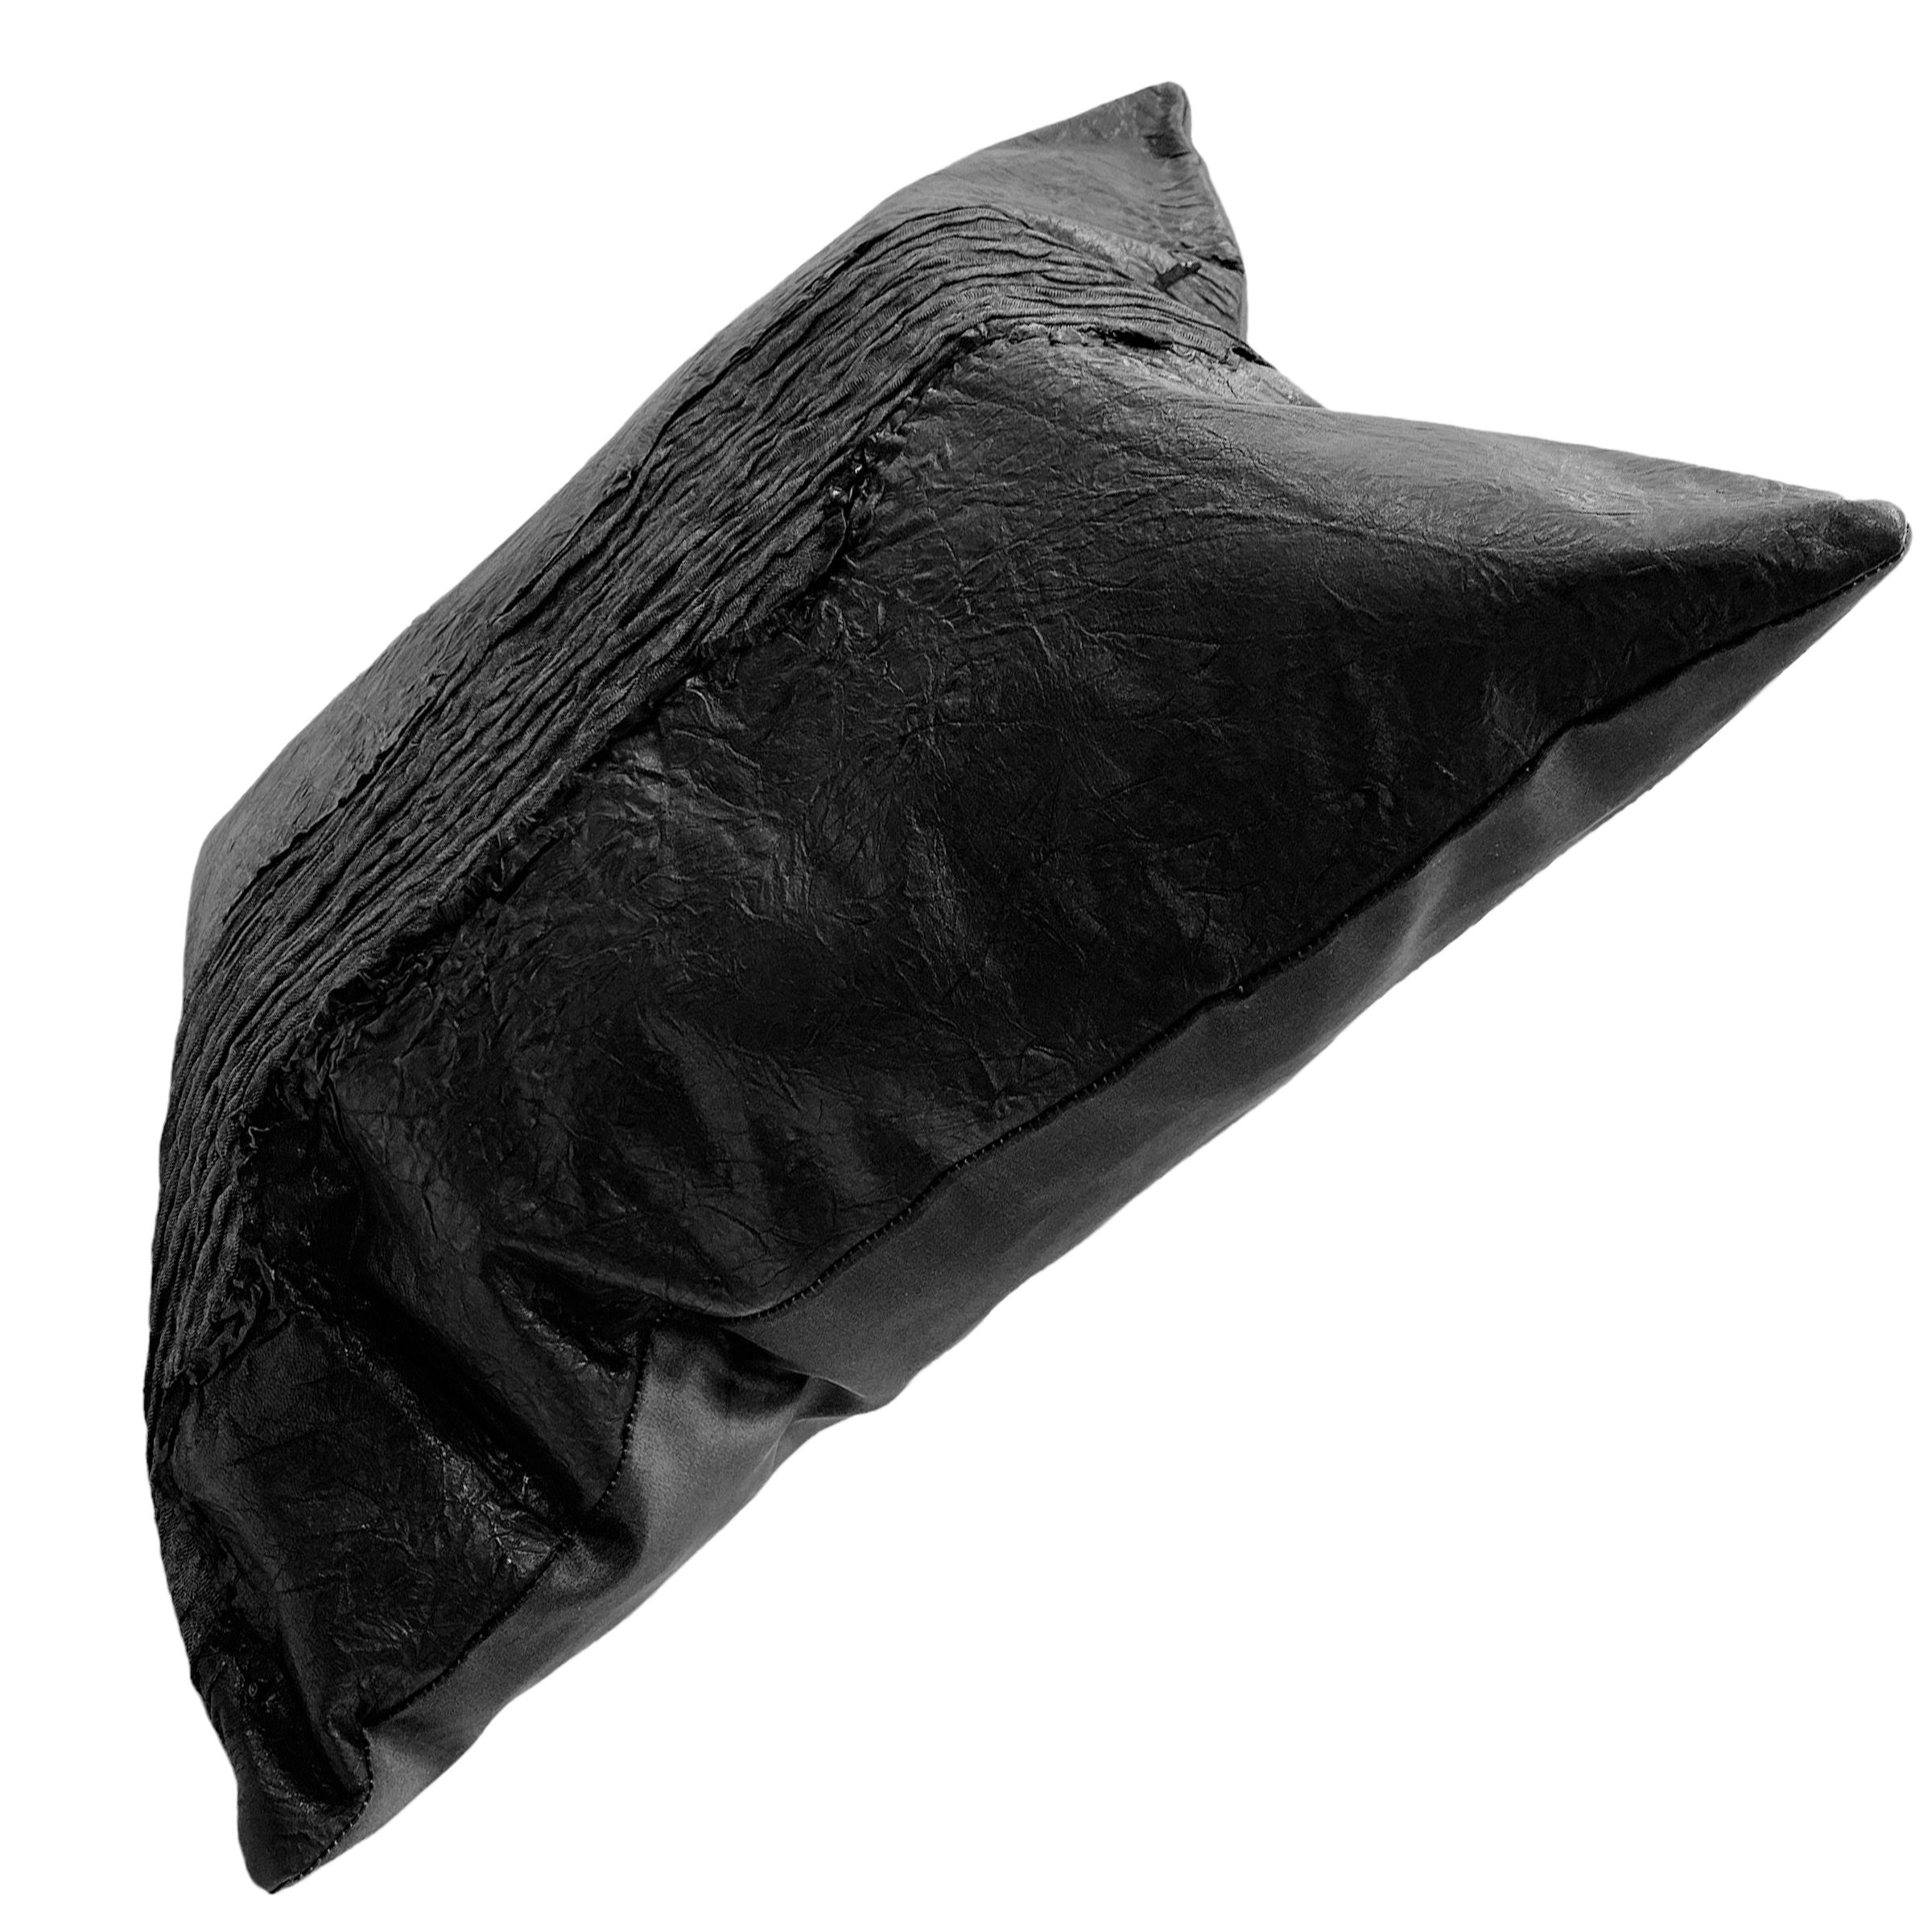 Contemporary Genuine Wrinkled Black Leather Pillows For Sale